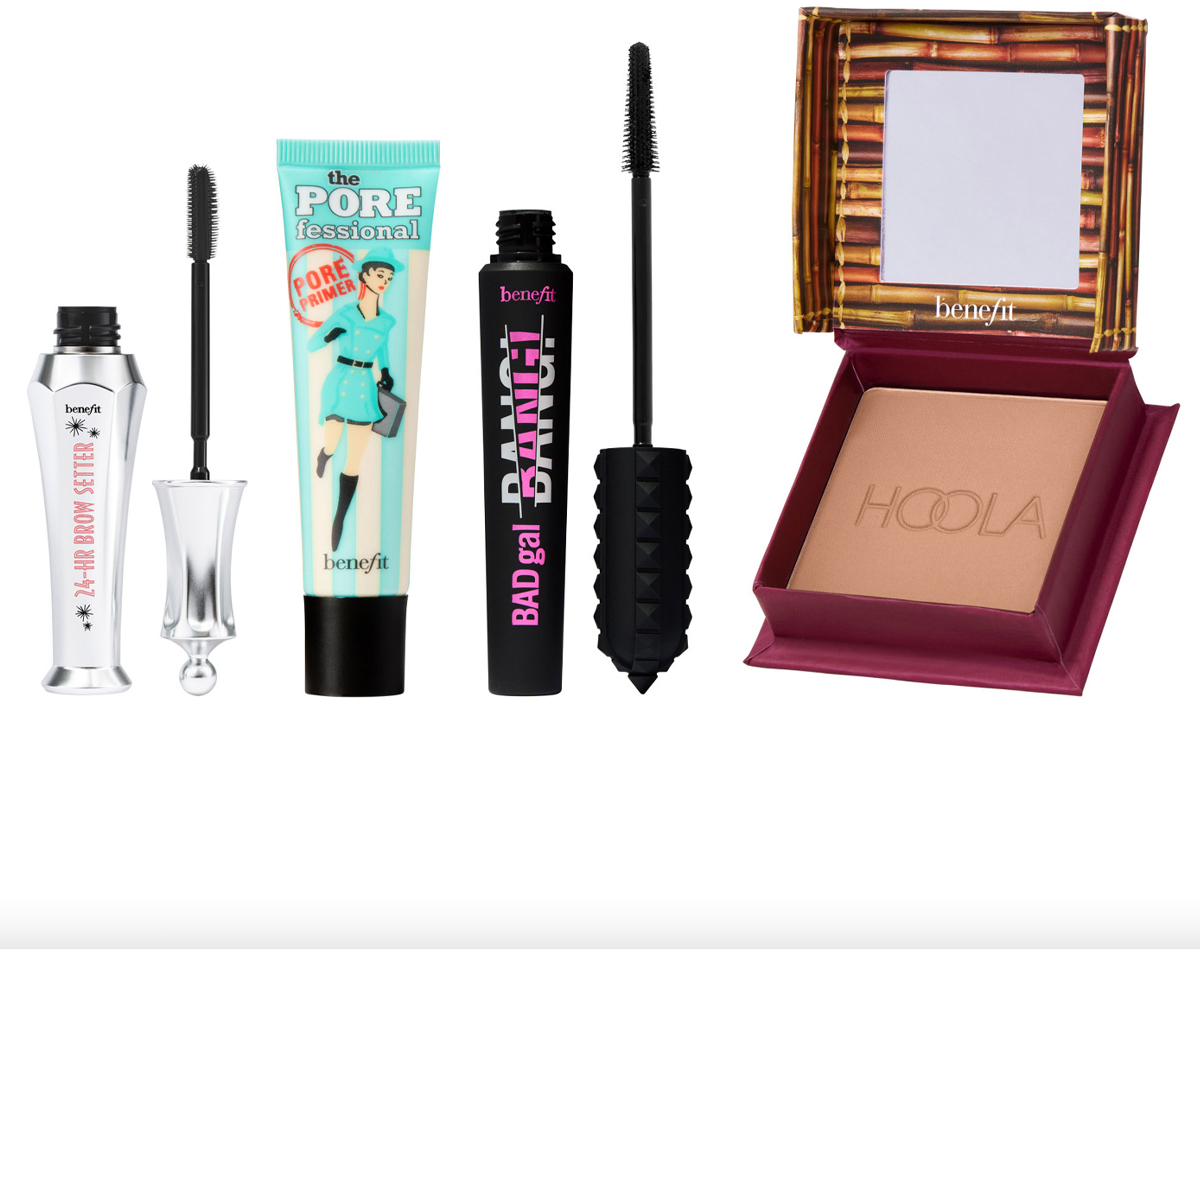 9 Best Benefit Cosmetics Products 2018 - Benefit Makeup and Mascara